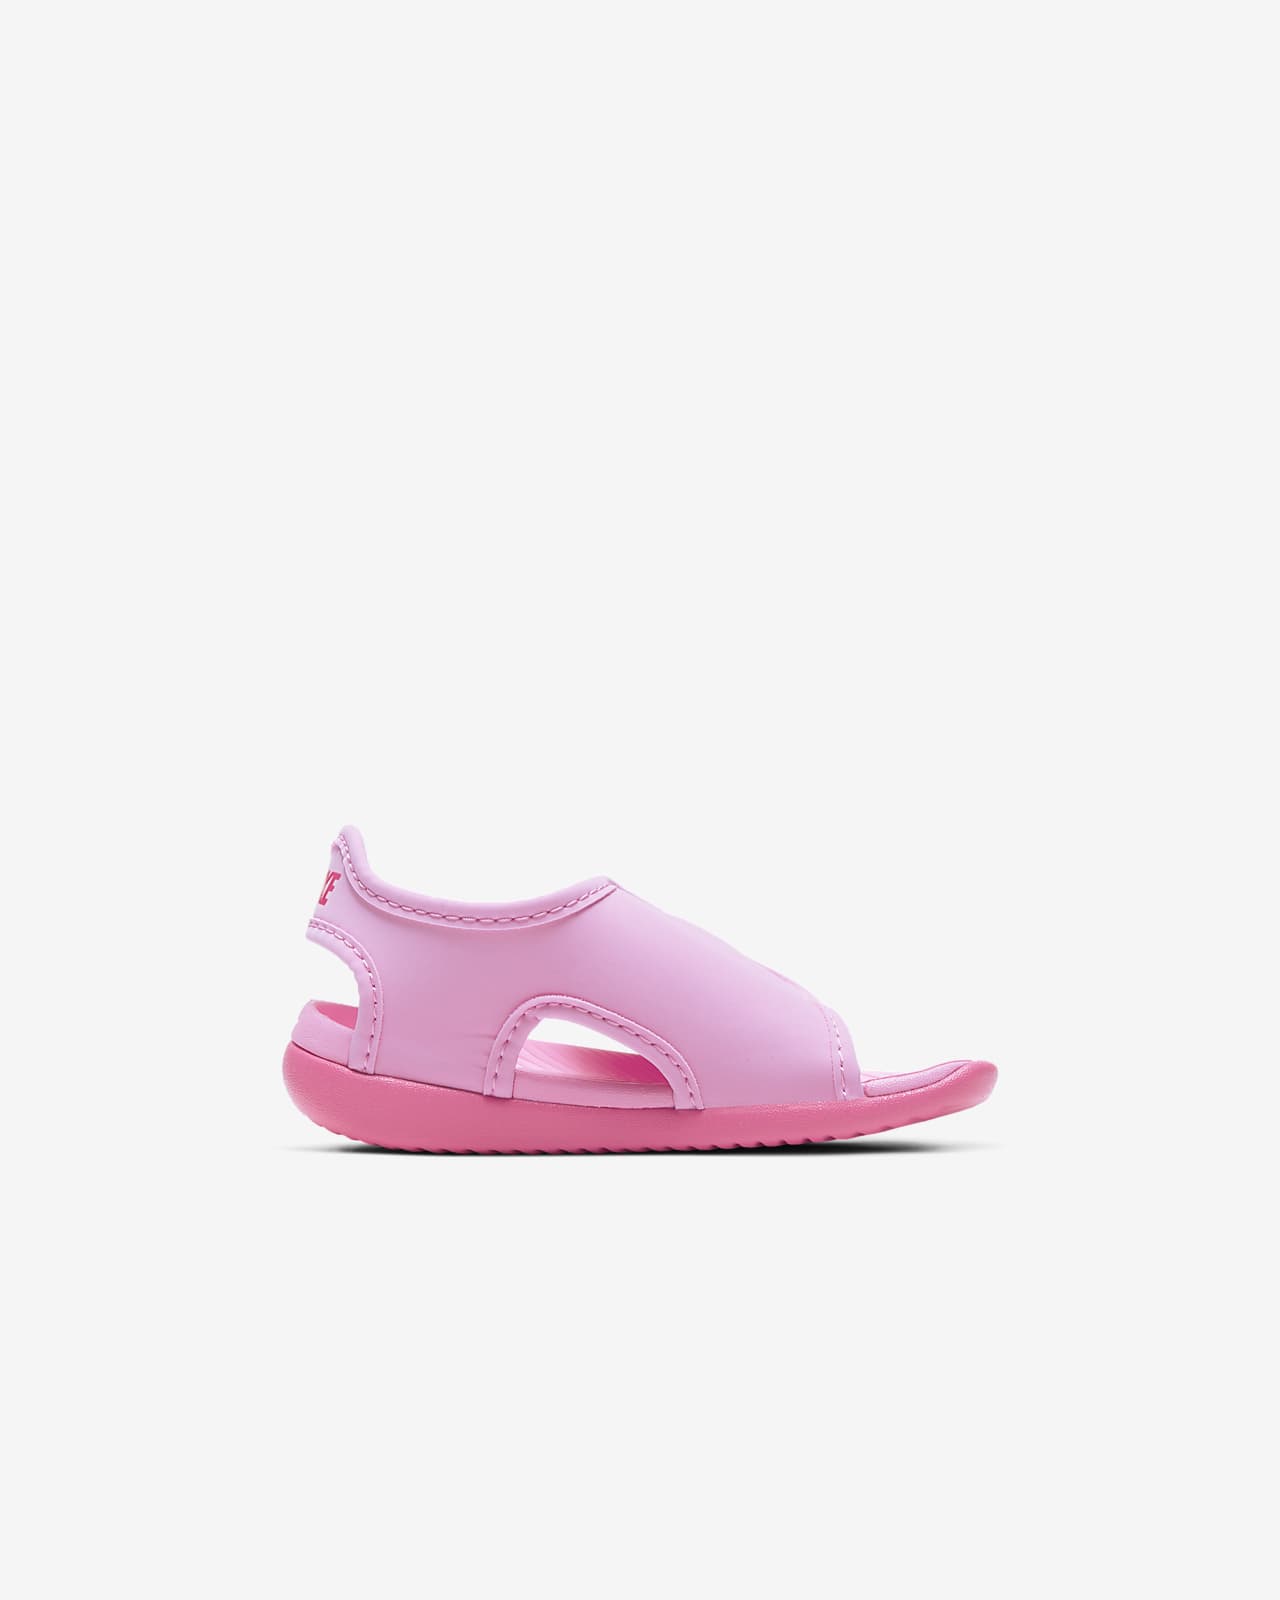 nike sunray toddler shoes